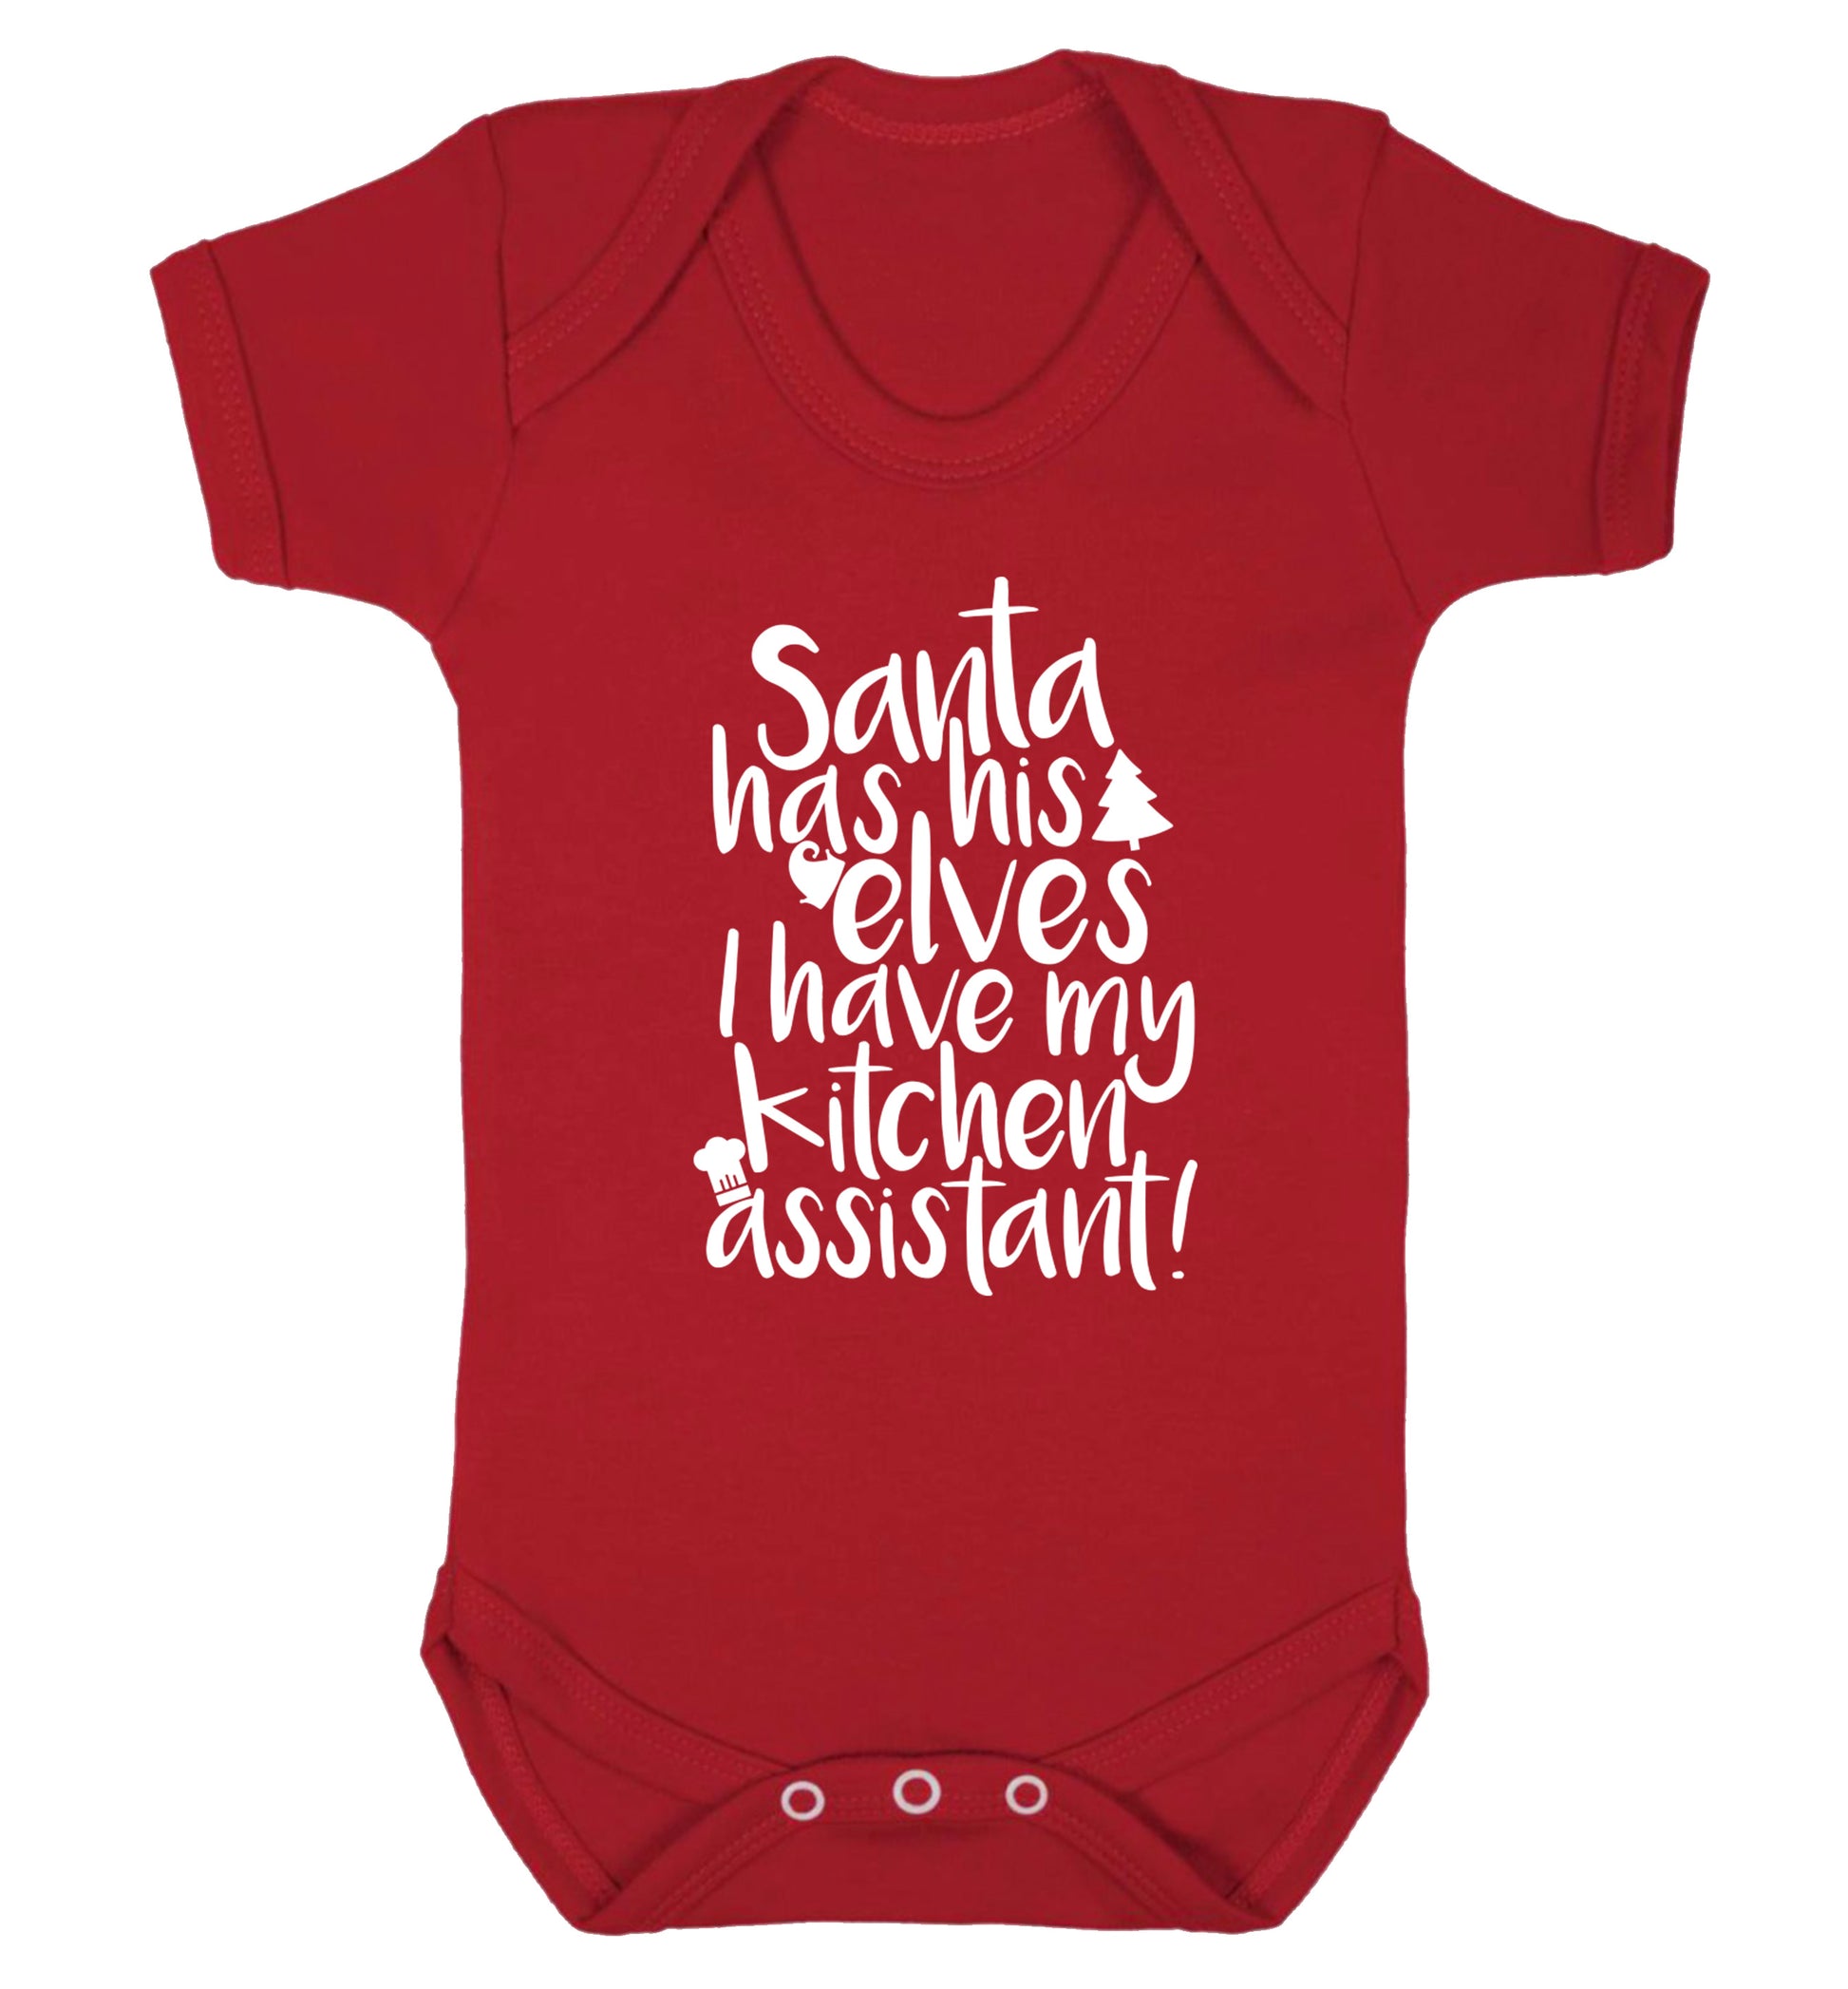 Santa has his elves I have my kitchen assistant Baby Vest red 18-24 months